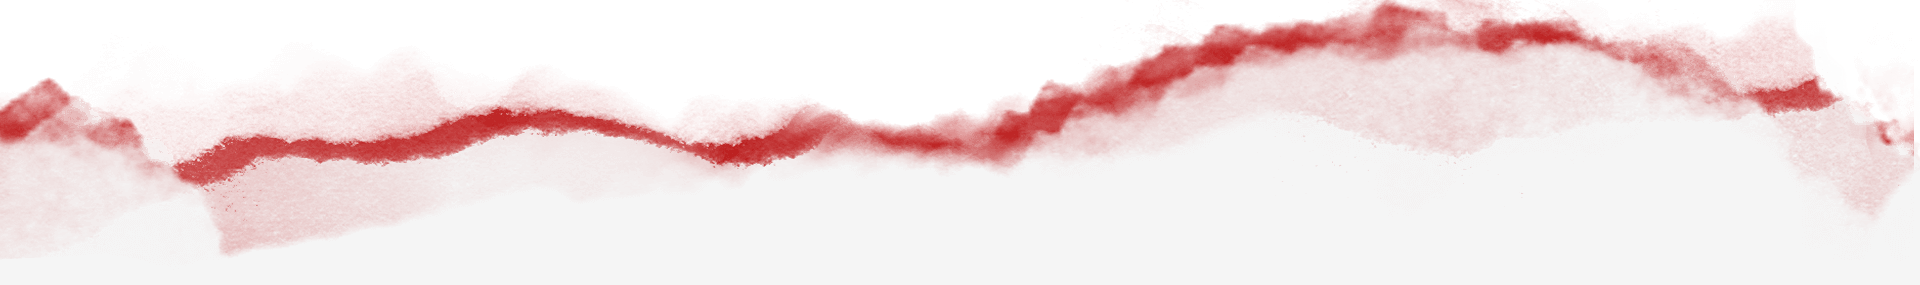 A red and white background with some clouds